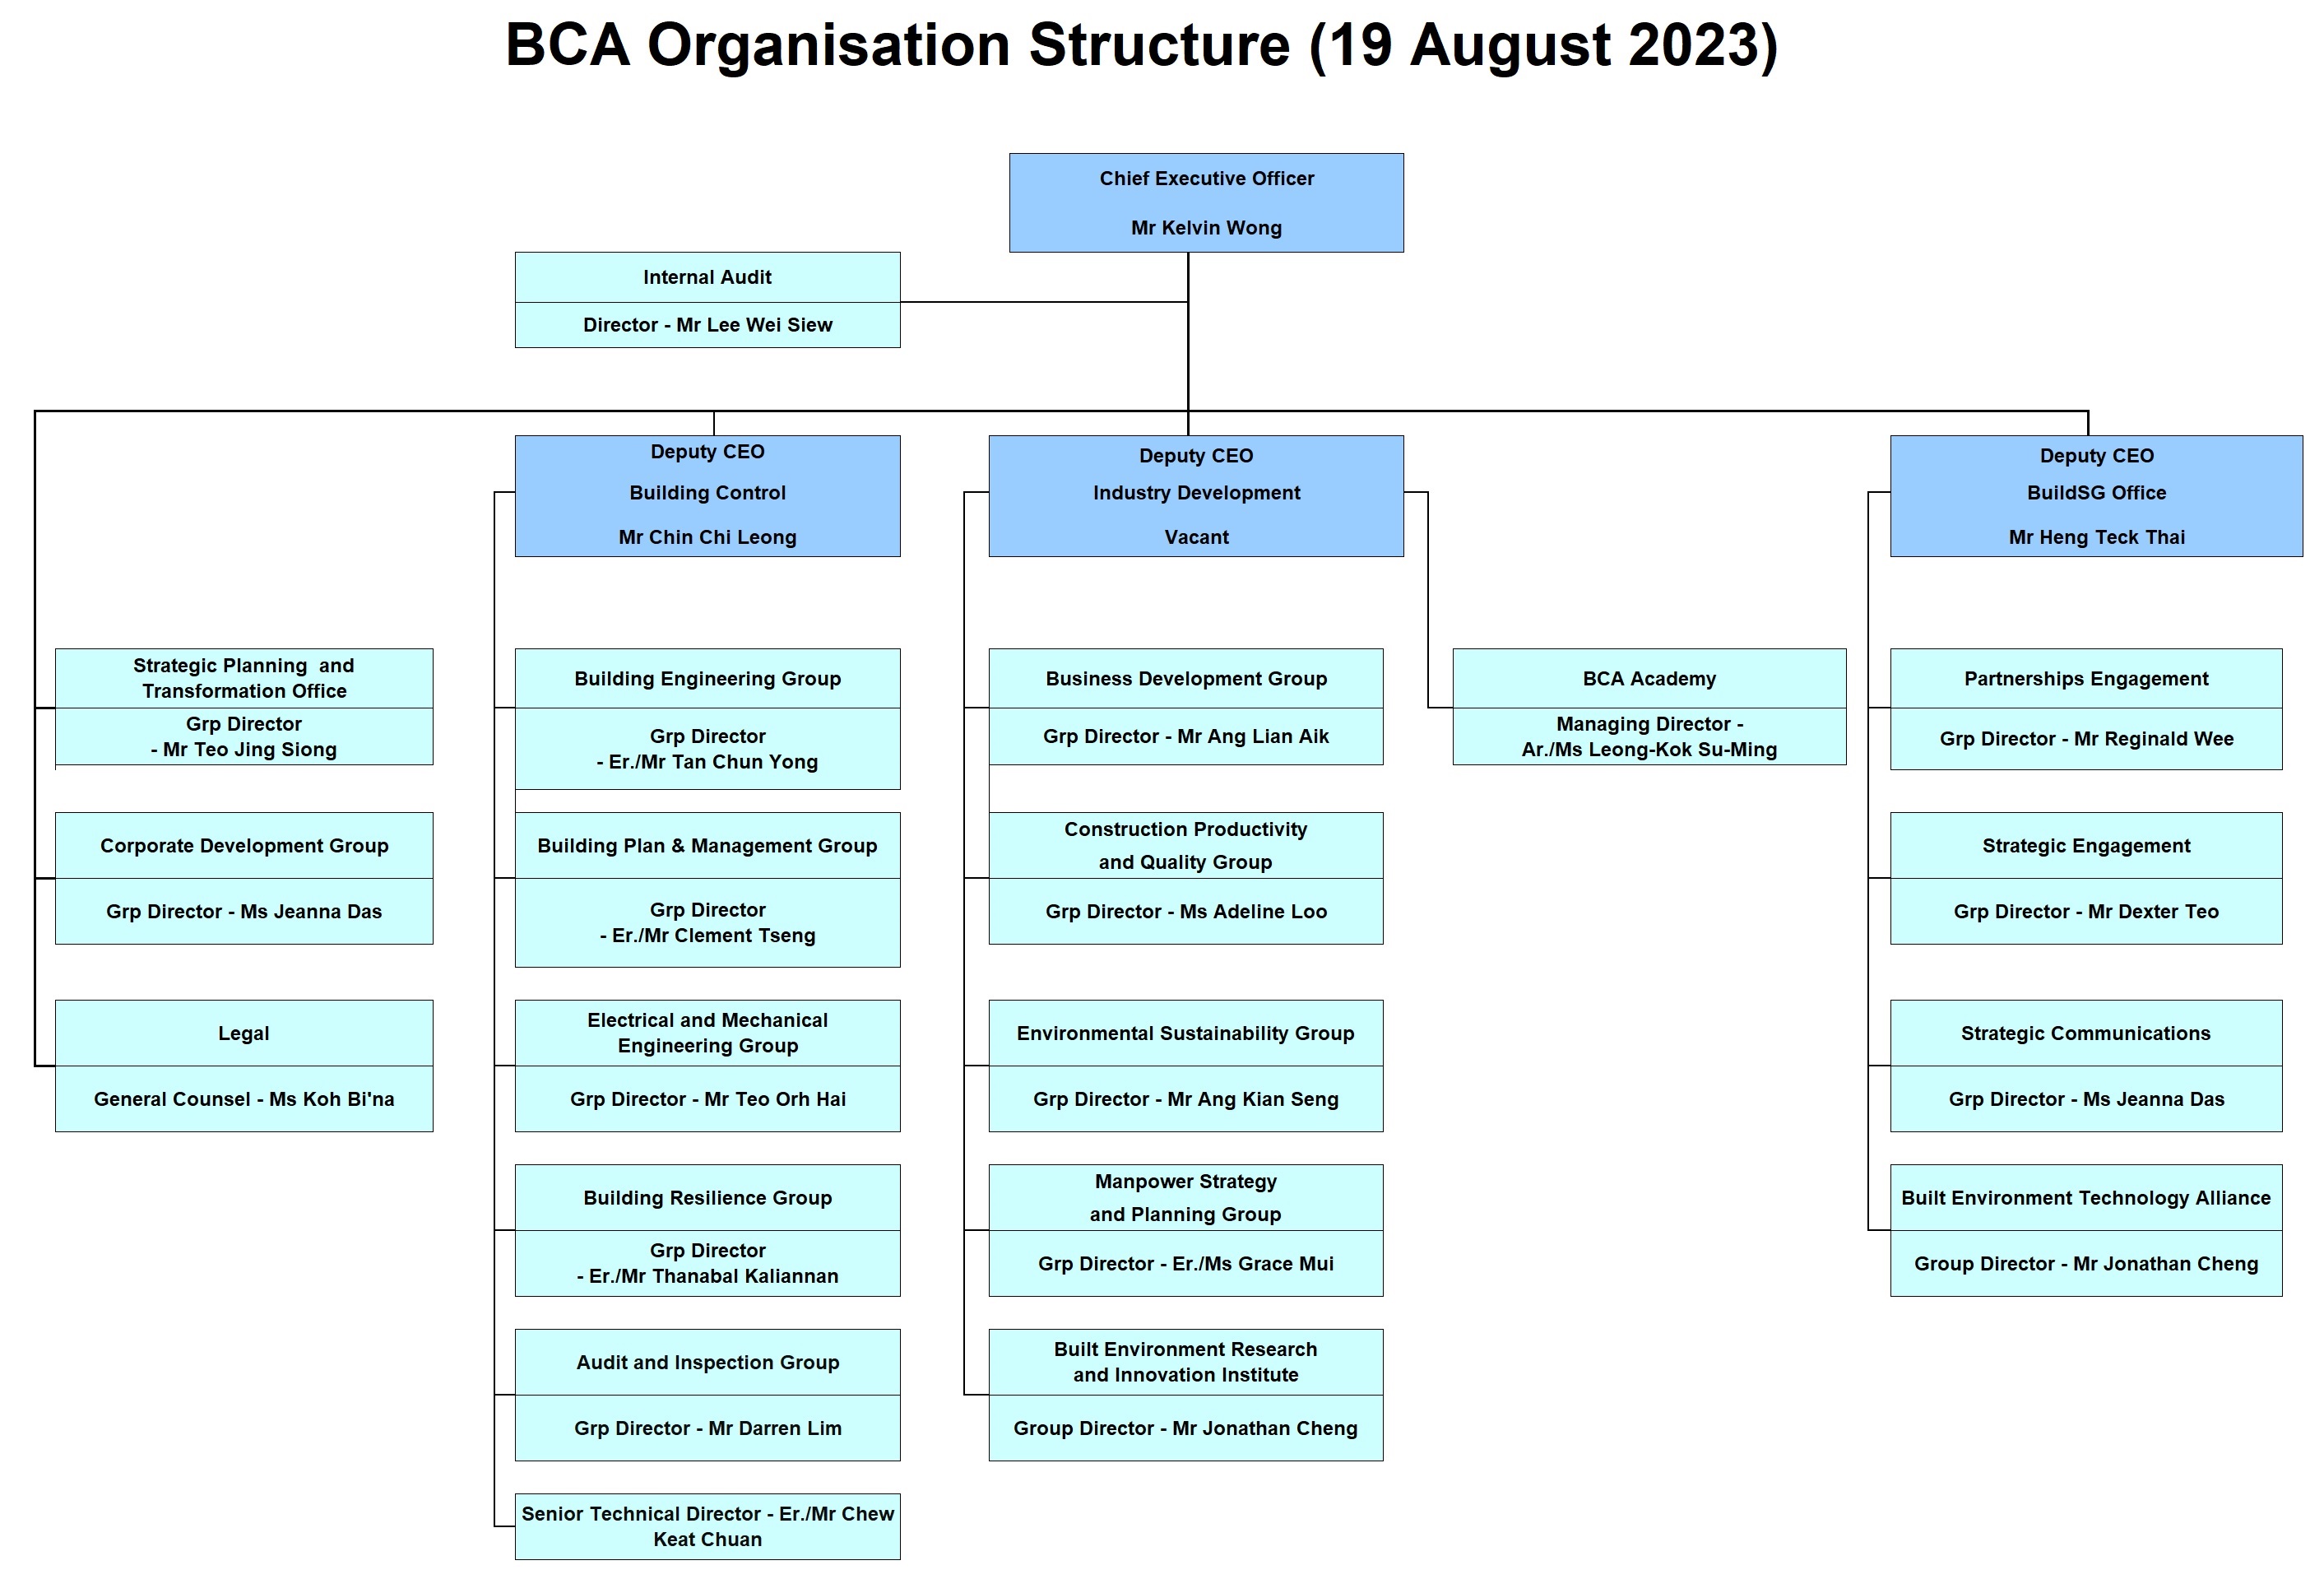 BCA_org_structure